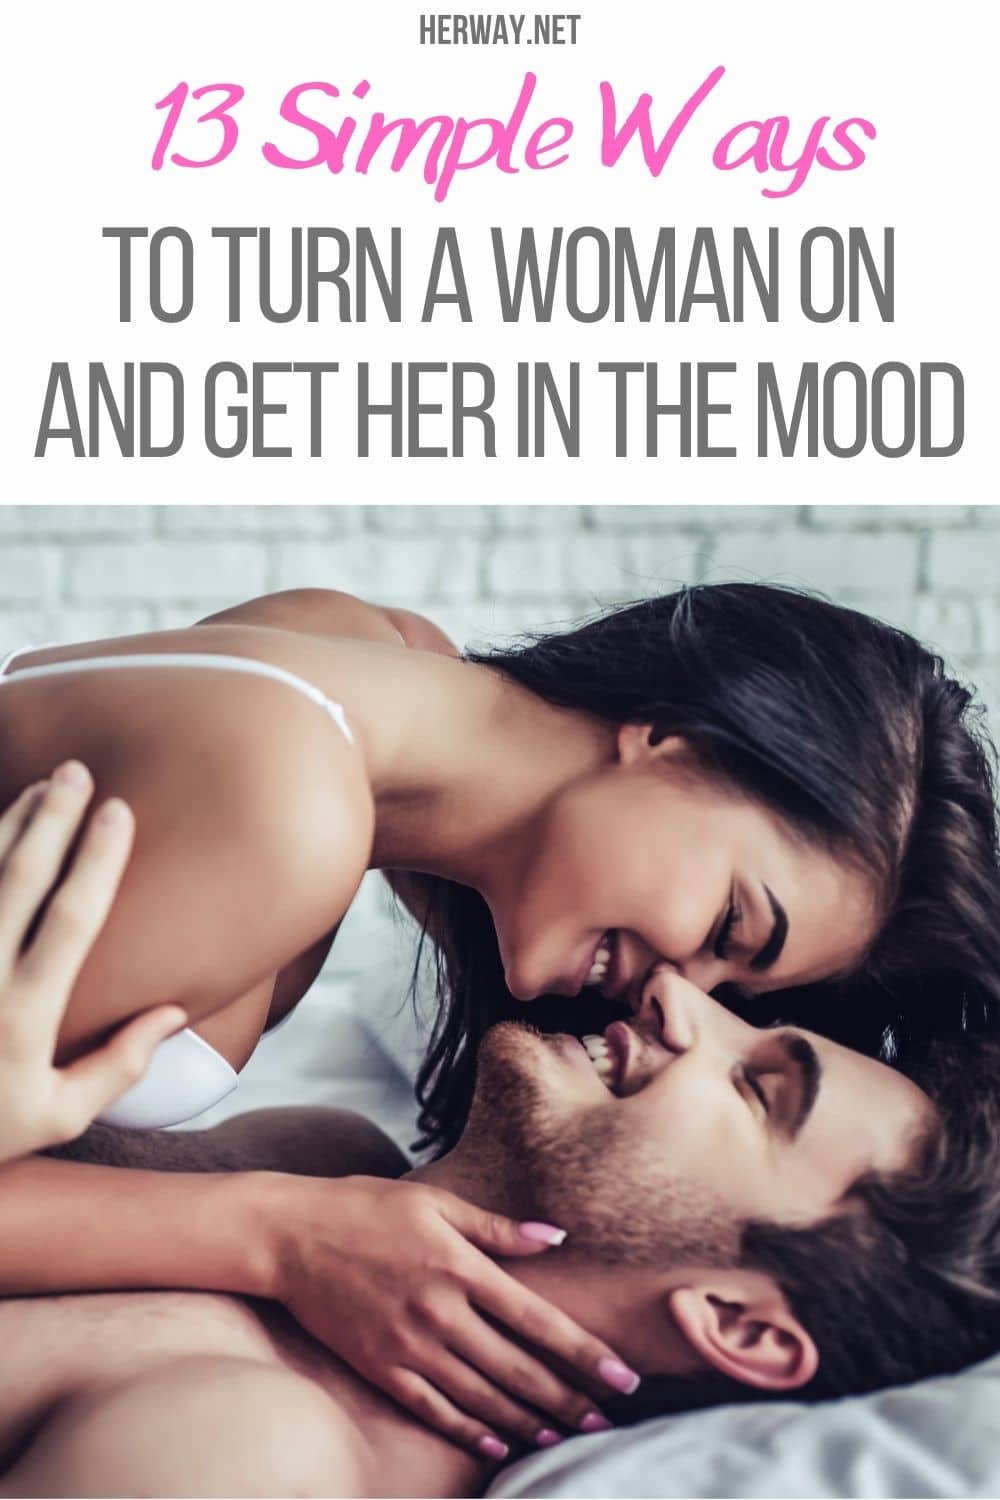 13 Simple Ways To Turn A Woman On And Get Her In The Mood